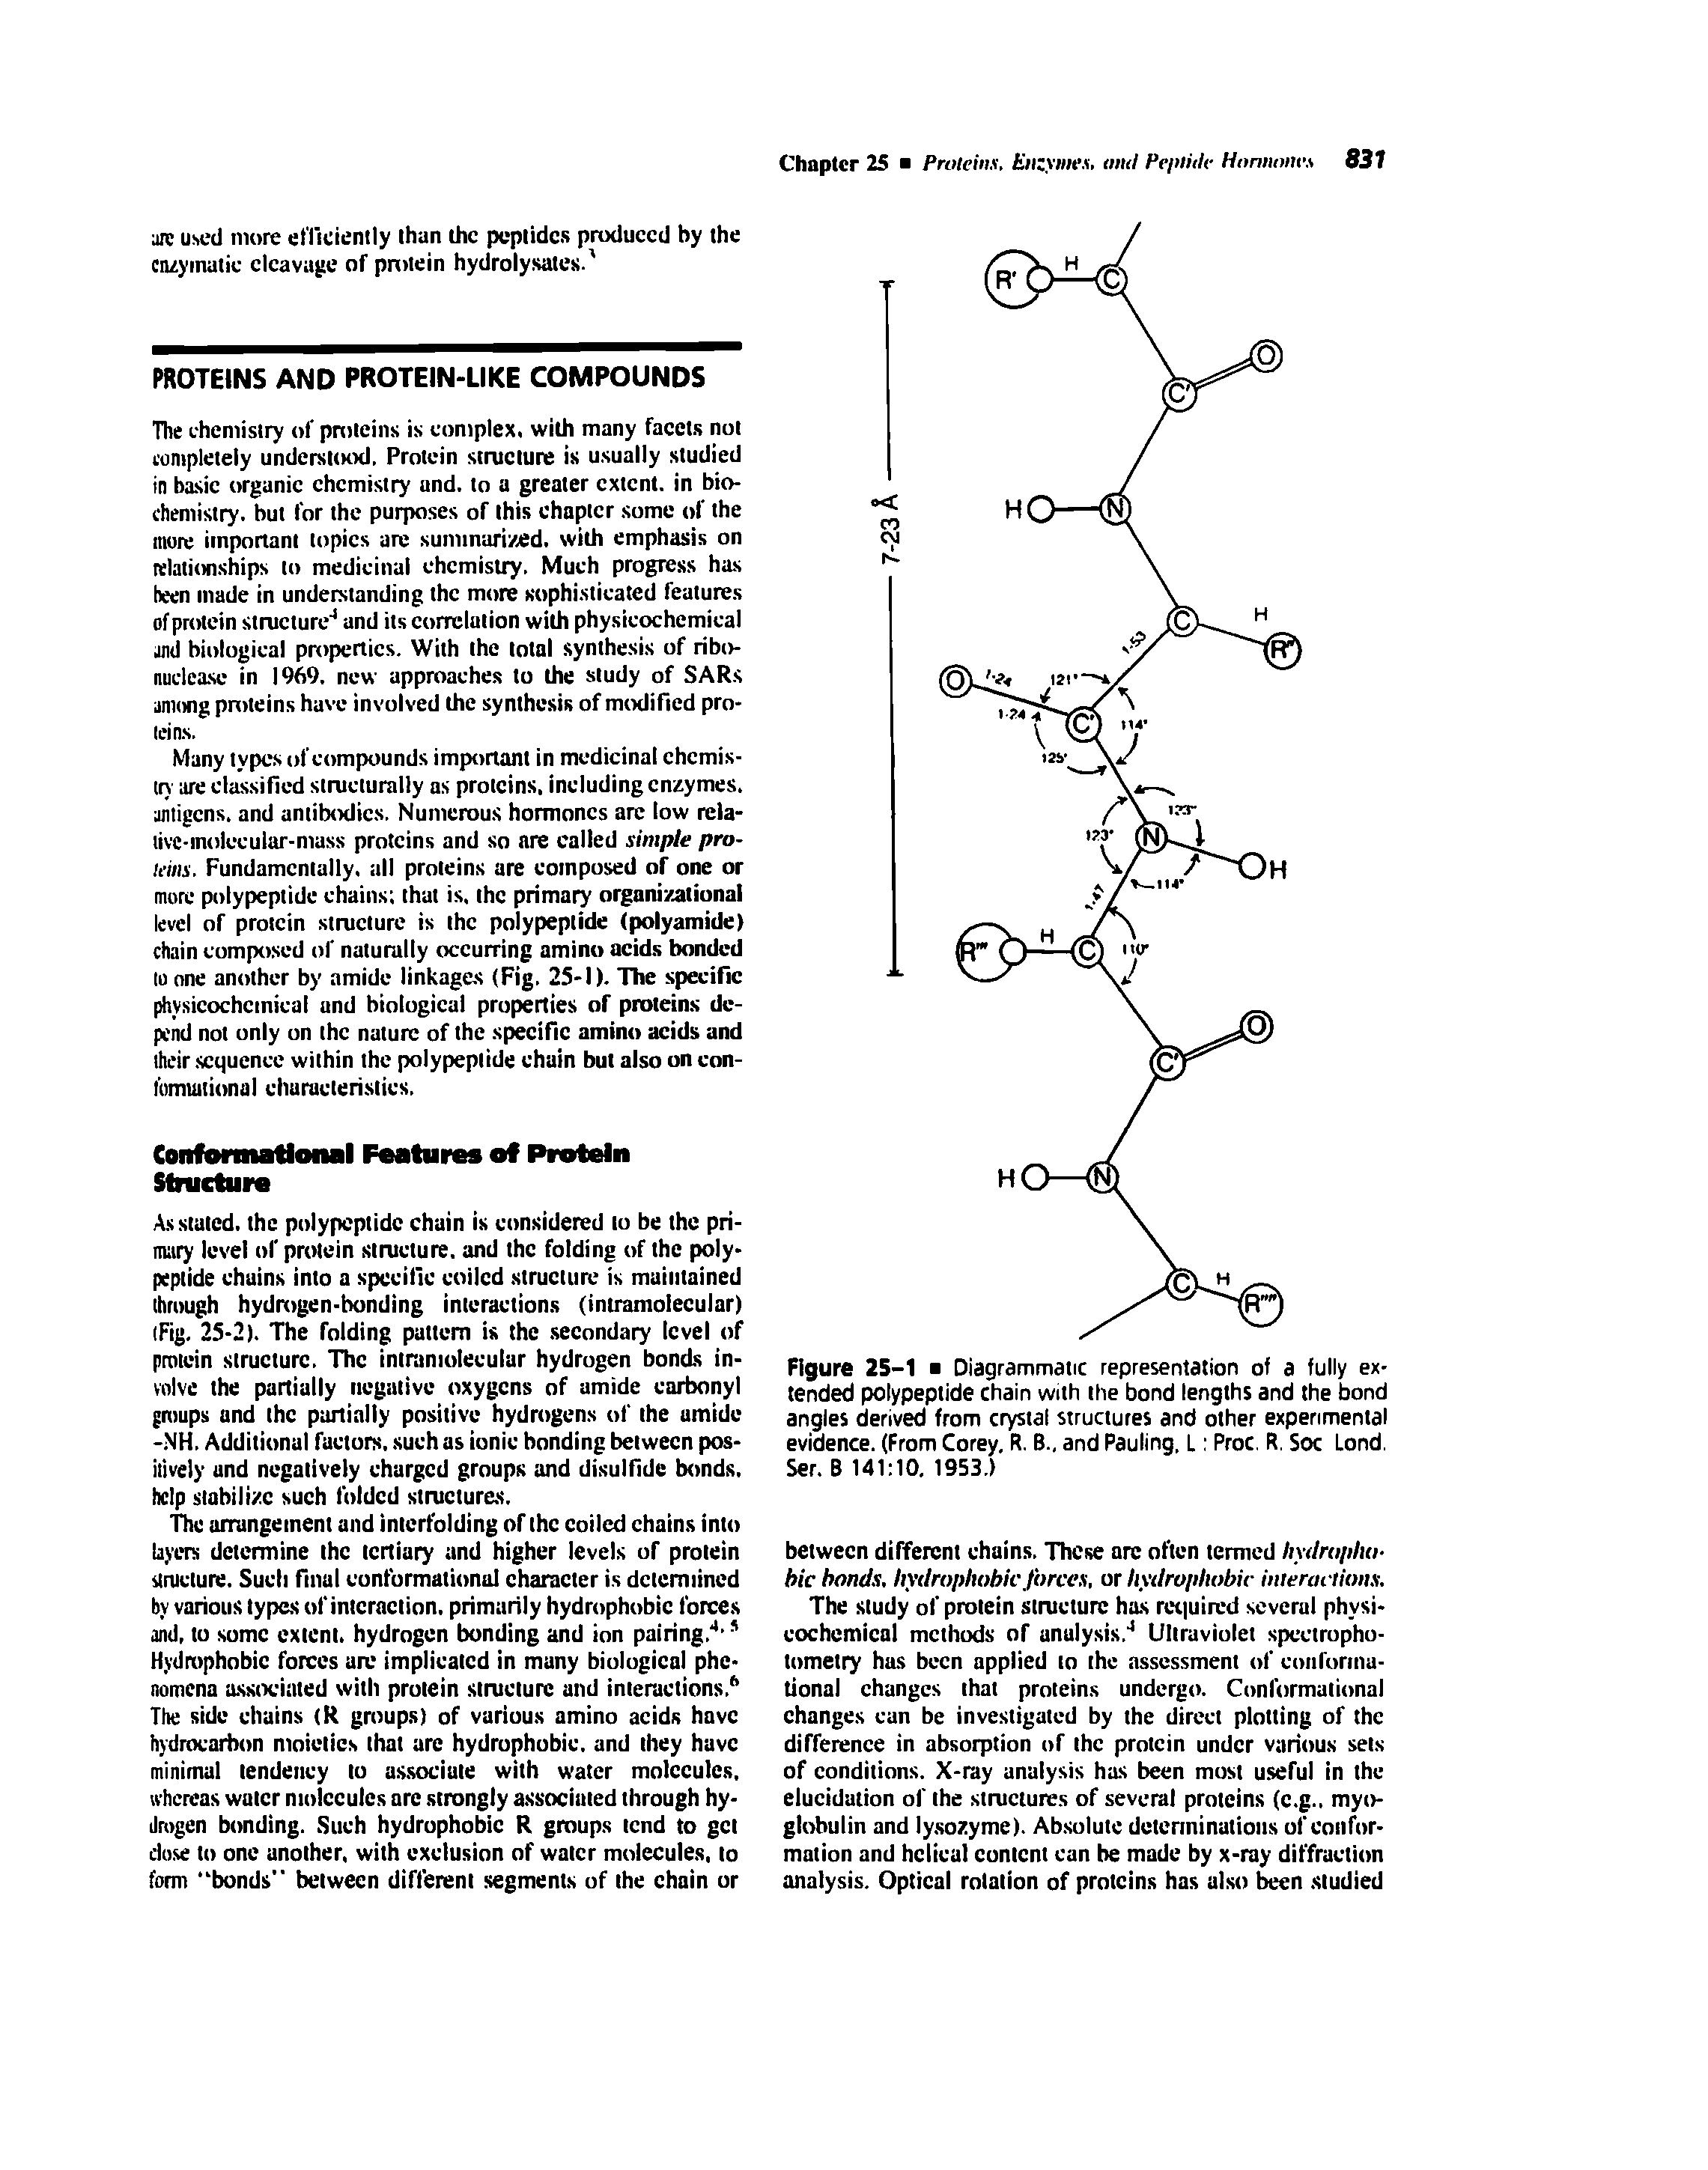 Figure 25-1 Diagrammatic representation of a fully extended polypeptide chain with the bond lengths and the bond angles derived from crystal structures and other experimental evidence. (From Corey, R. B., and Pauling, L Proc, R. Soc Lond. Ser. B 141 10. 1953.)...